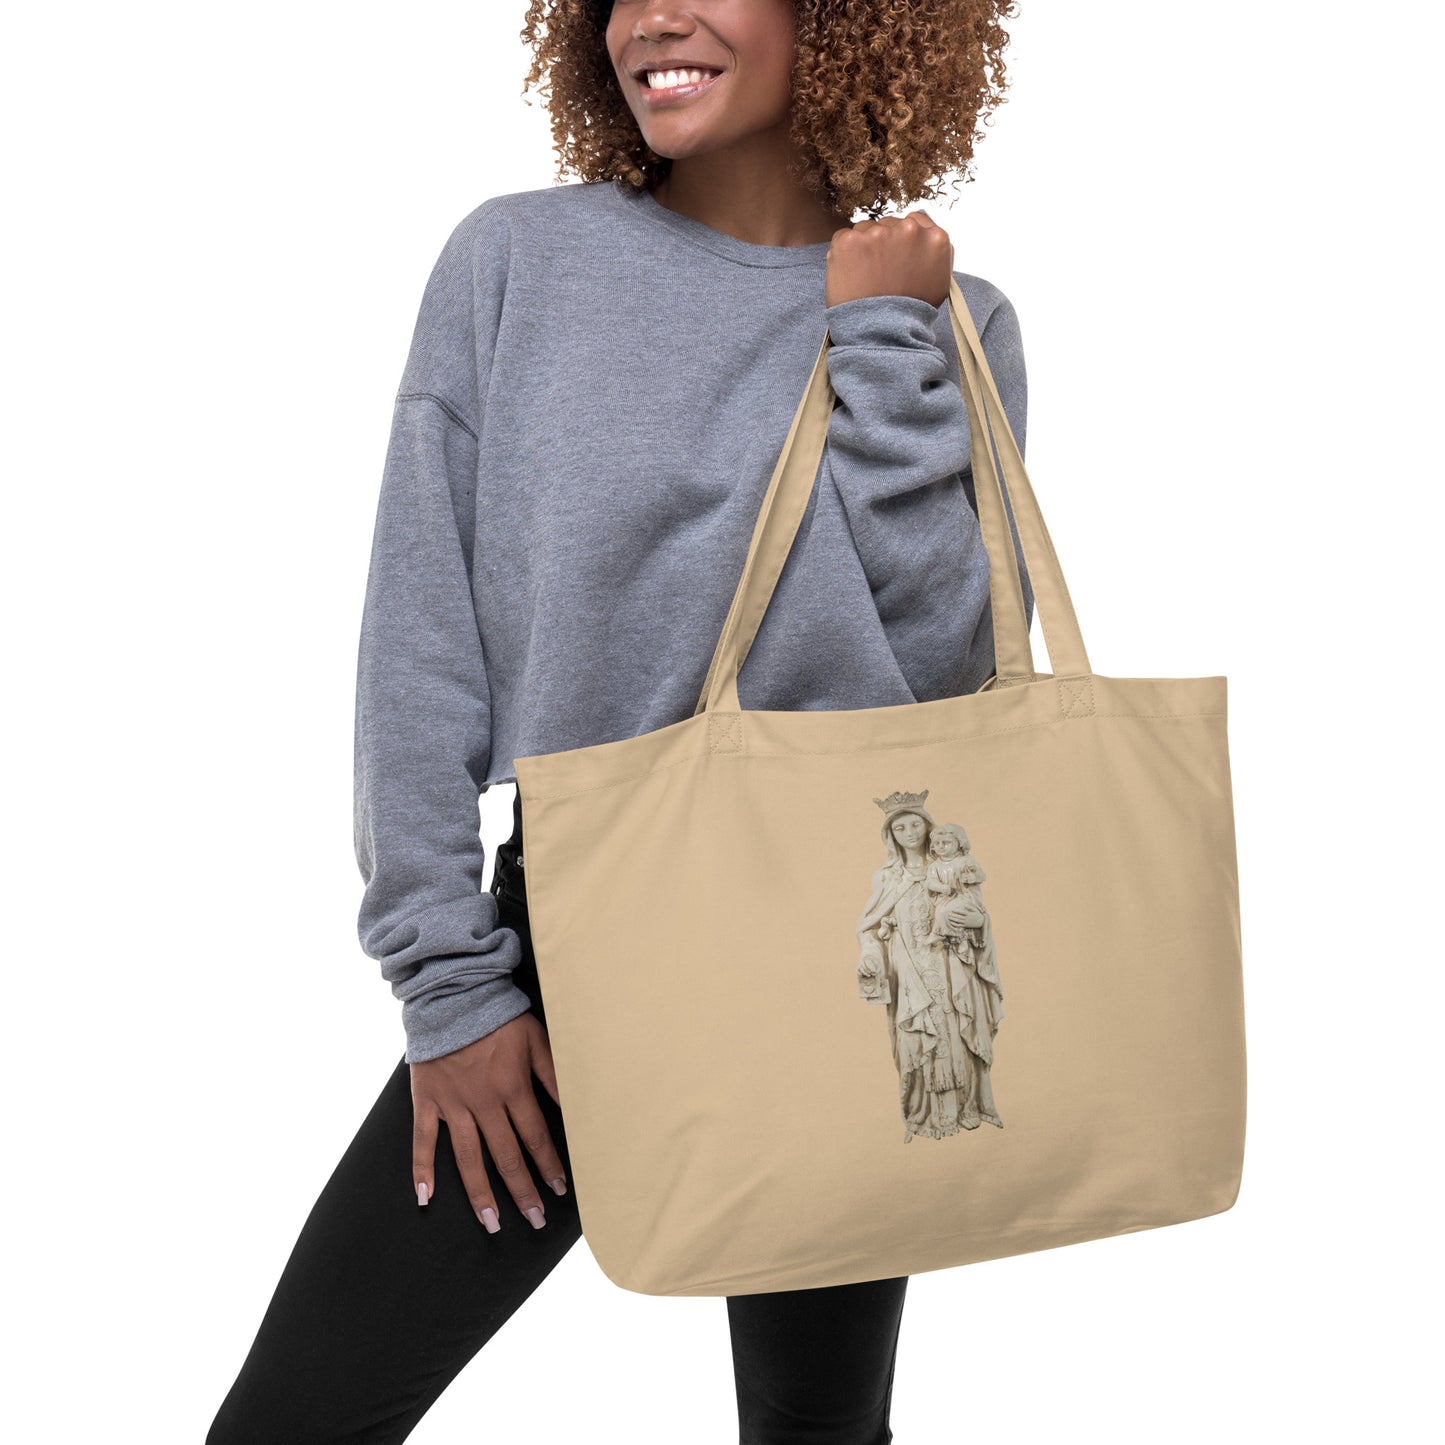 Images of Mary Large organic tote bag